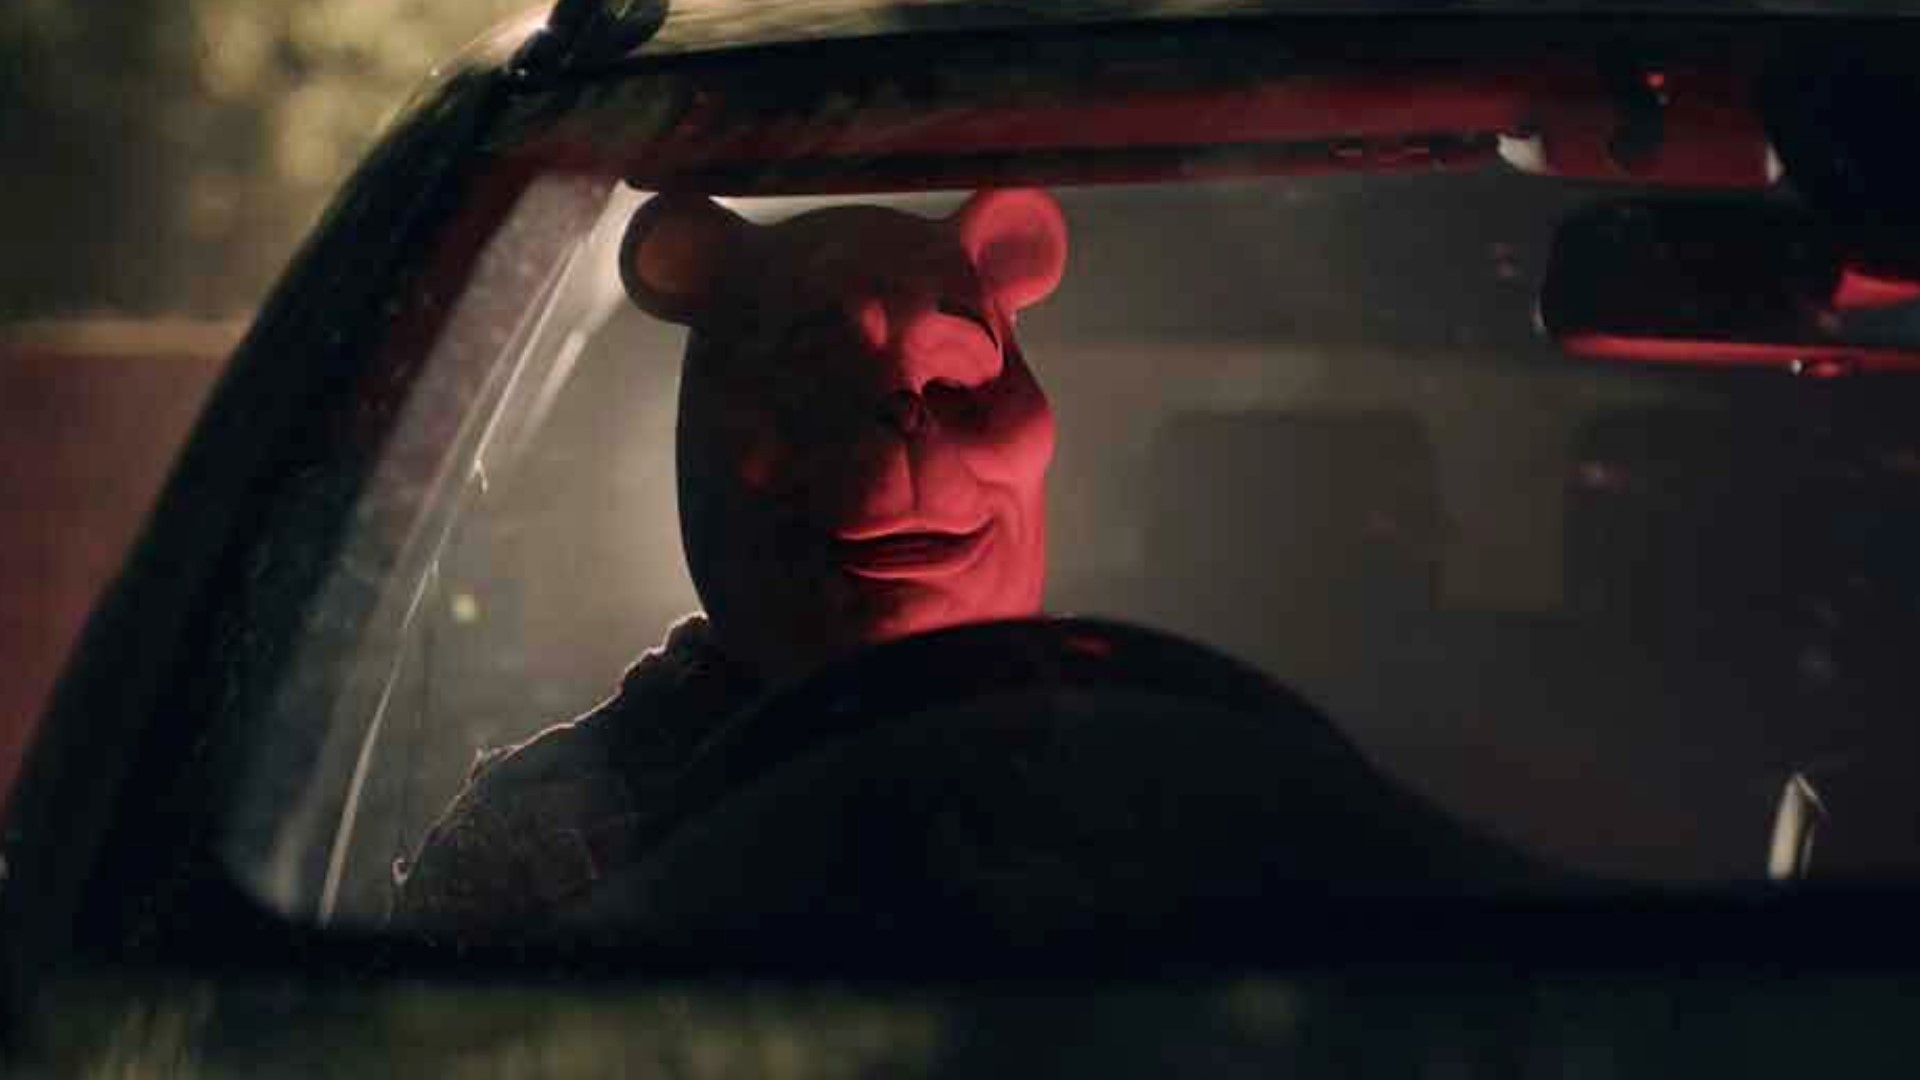 13News' Trevor Cox speaks with Rhys Frake-Waterfield, who directed, wrote and co-produced a horror film about Winnie-the-Pooh.